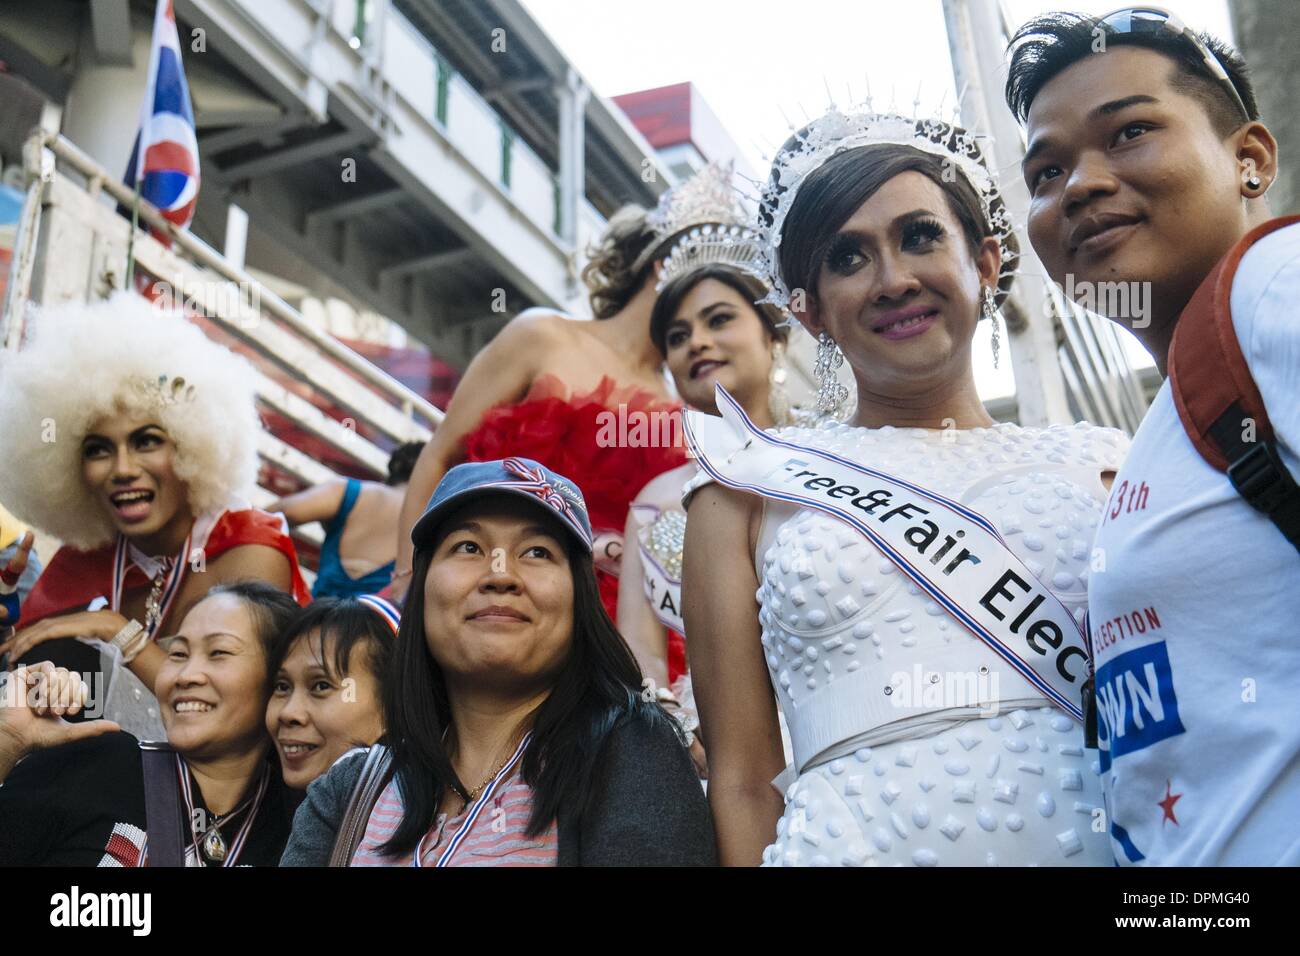 Bangkok, Thailand. 13th Jan, 2014. Anti-government protesters pose with a group of ladyboys (Thai transvestites), during the first day of the shutdown of the Thai capital. The blockade of Bangkok is the last attempt by royalists and the urban middle class to force out the elected government of Yingluck Shinawattra. Credit:  Thomas De Cian/NurPhoto/ZUMAPRESS.com/Alamy Live News Stock Photo